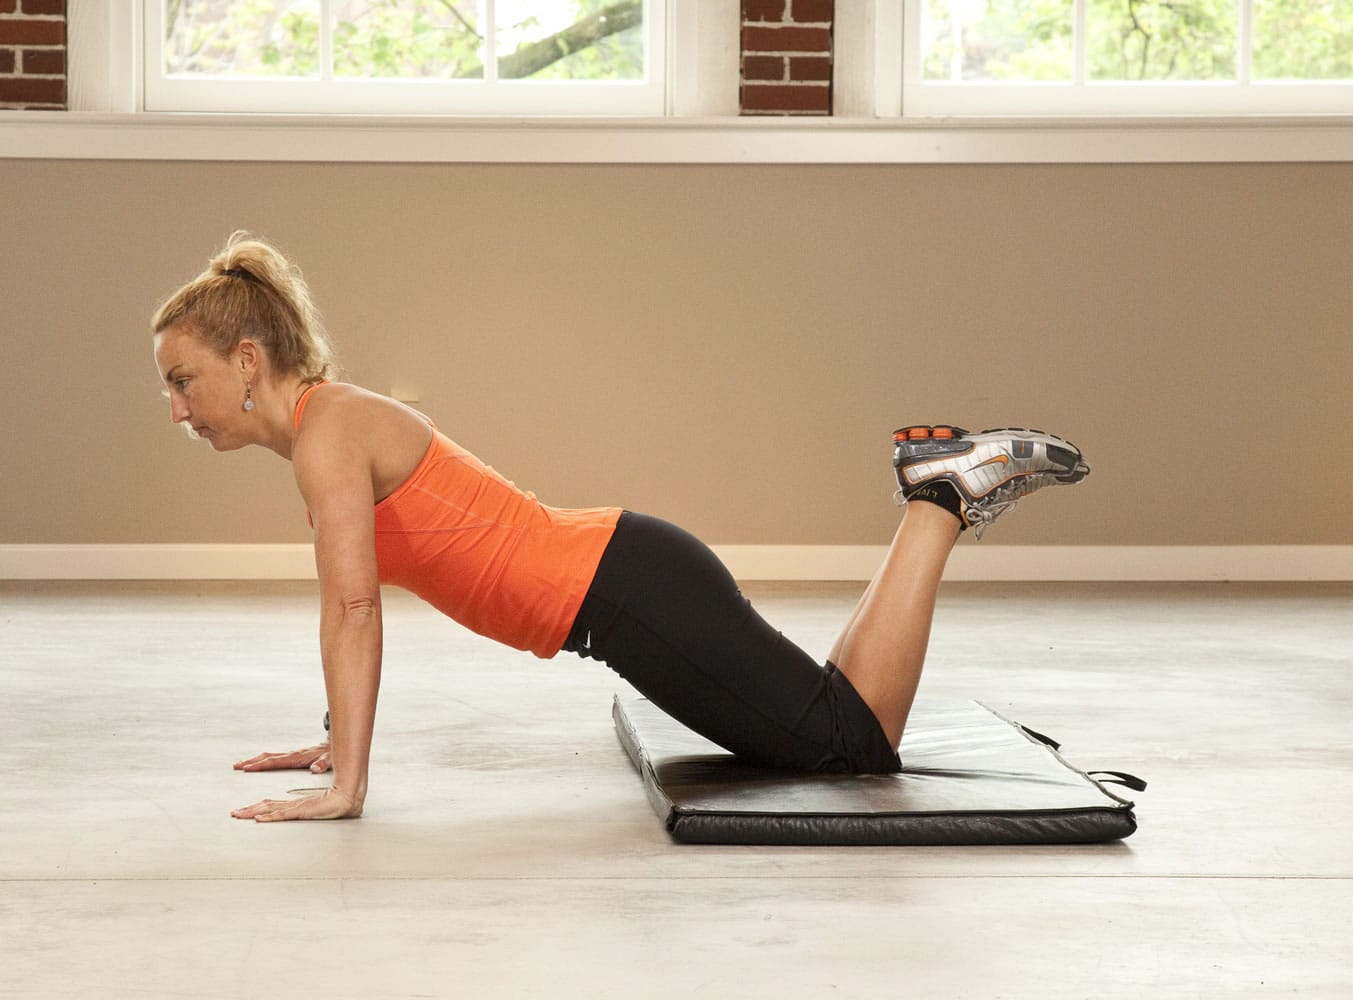 Upper Body: Push ups. Lay on your stomach with your heels up towards your buttocks.  Position your hands on the floor a few inches beside your shoulder.